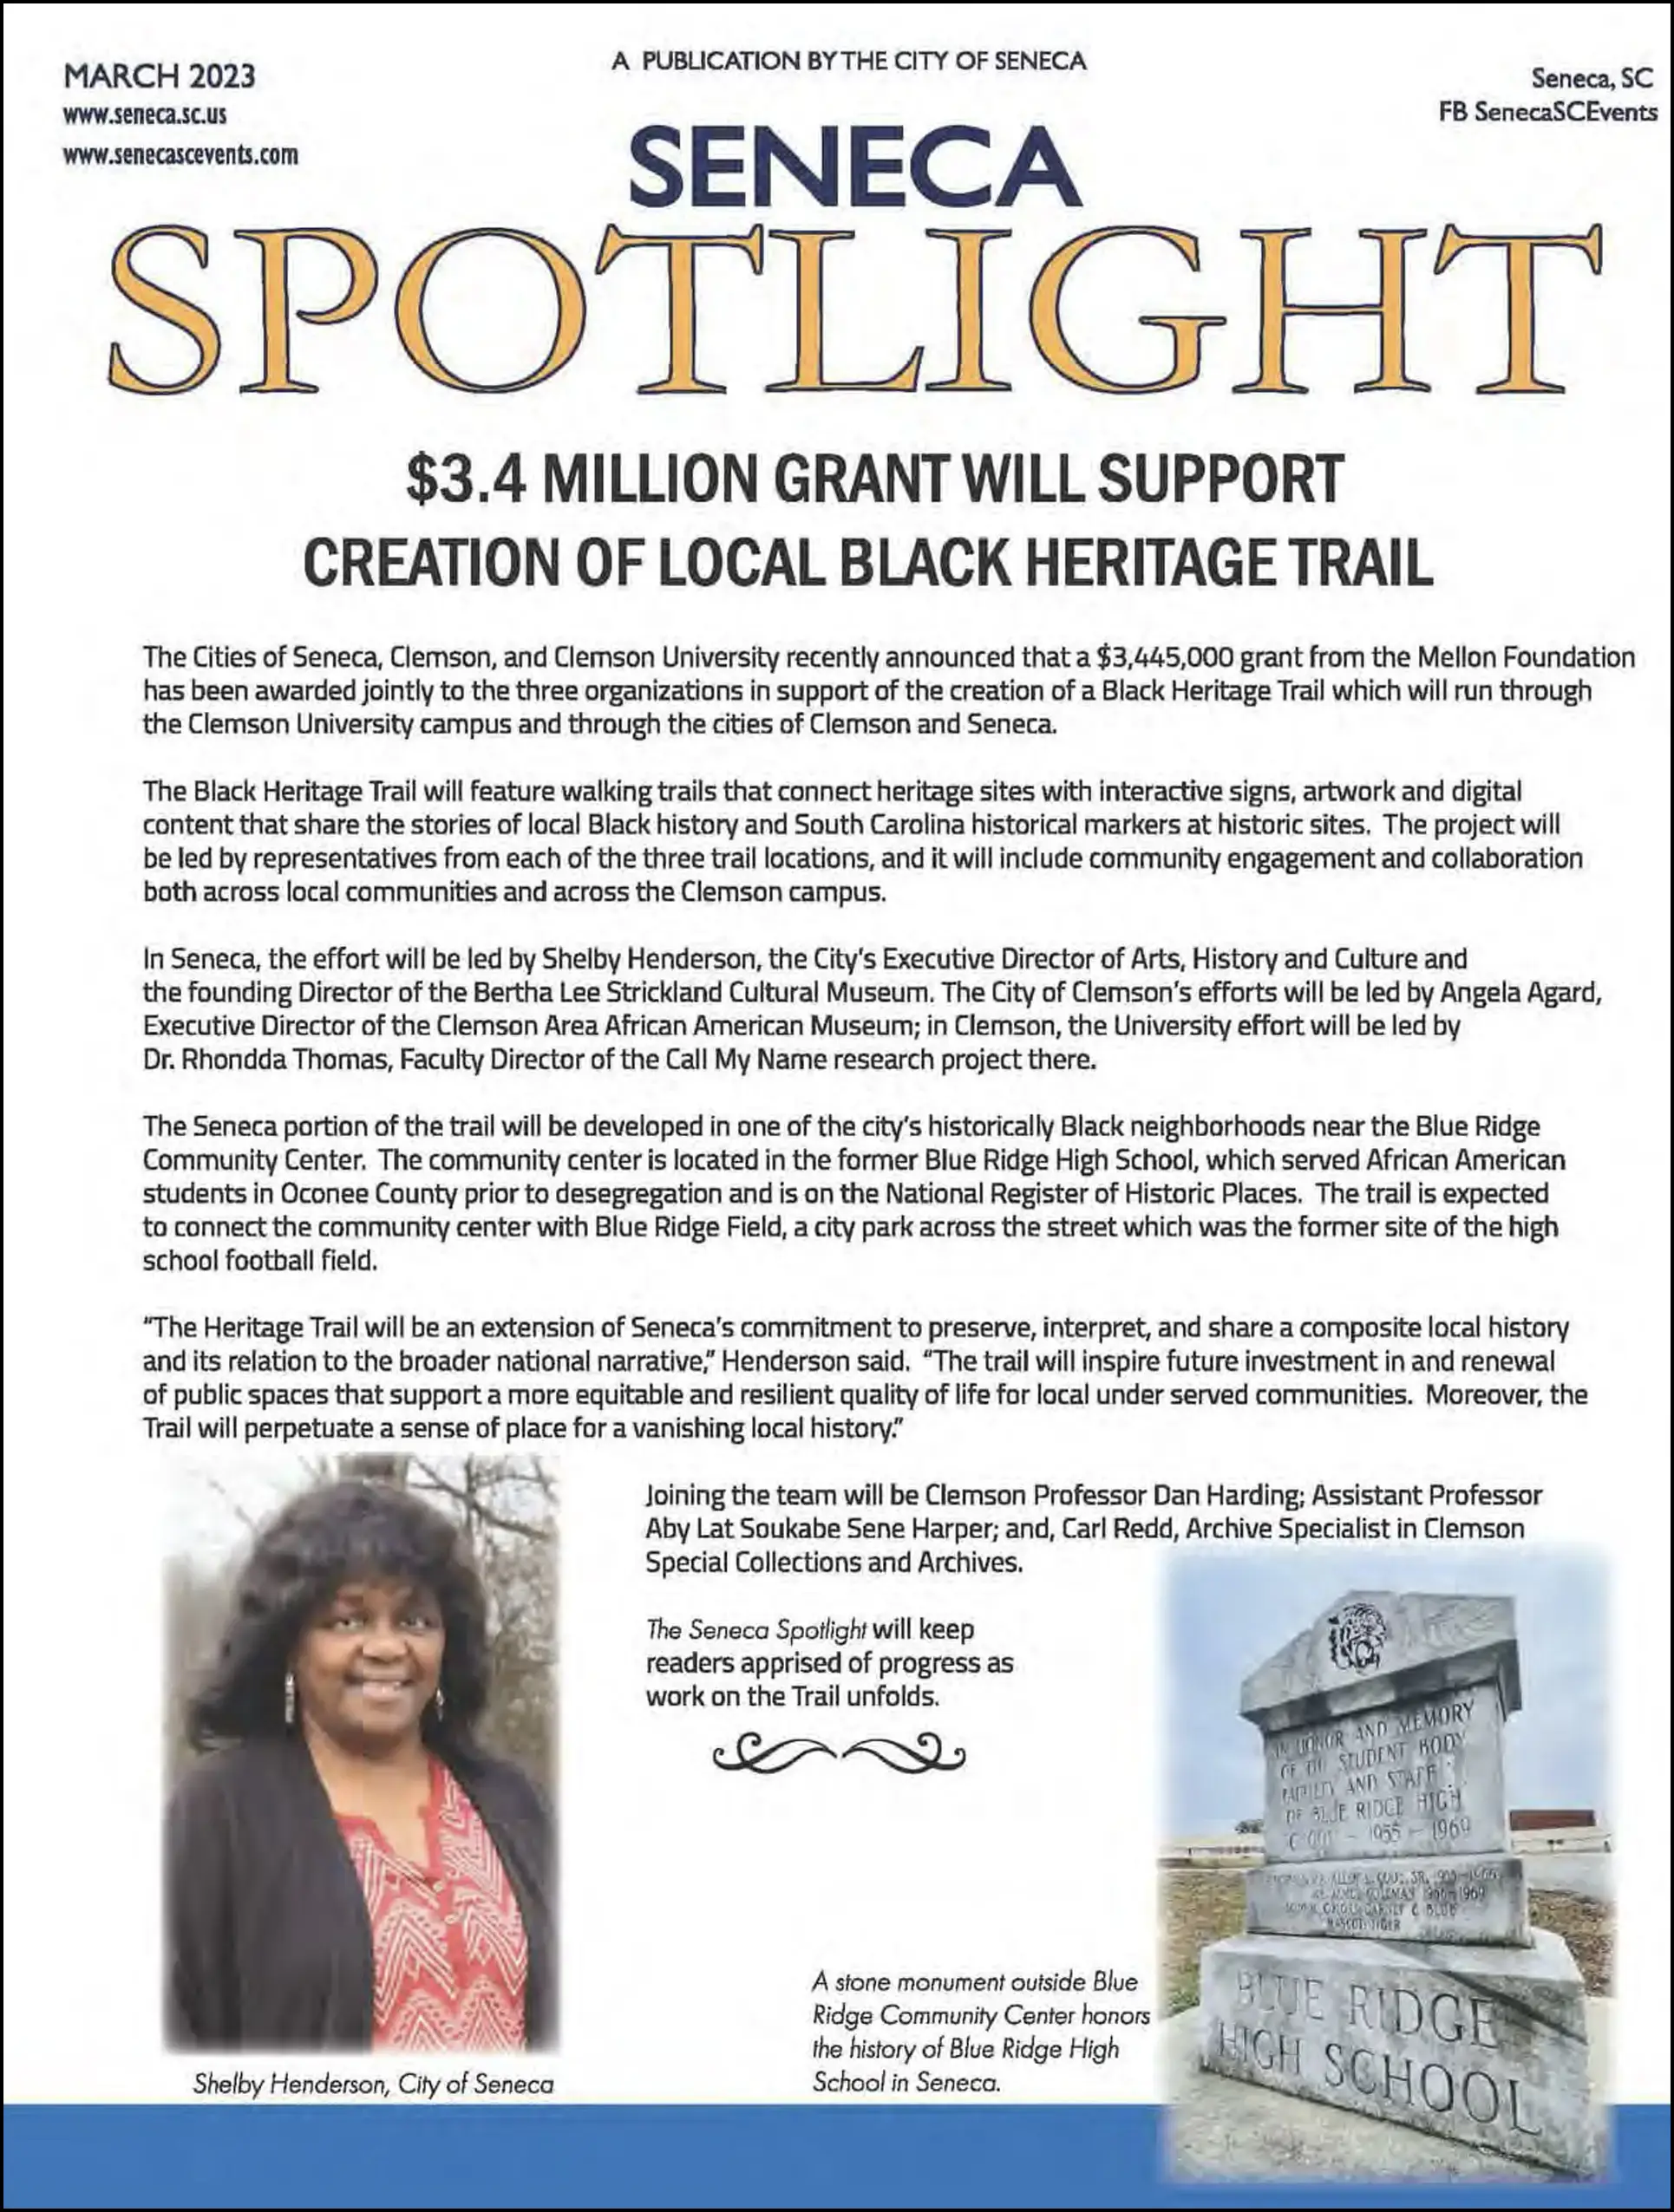 grant-of-3-4-million-will-support-creation-of-local-black-heritage-trail-2023